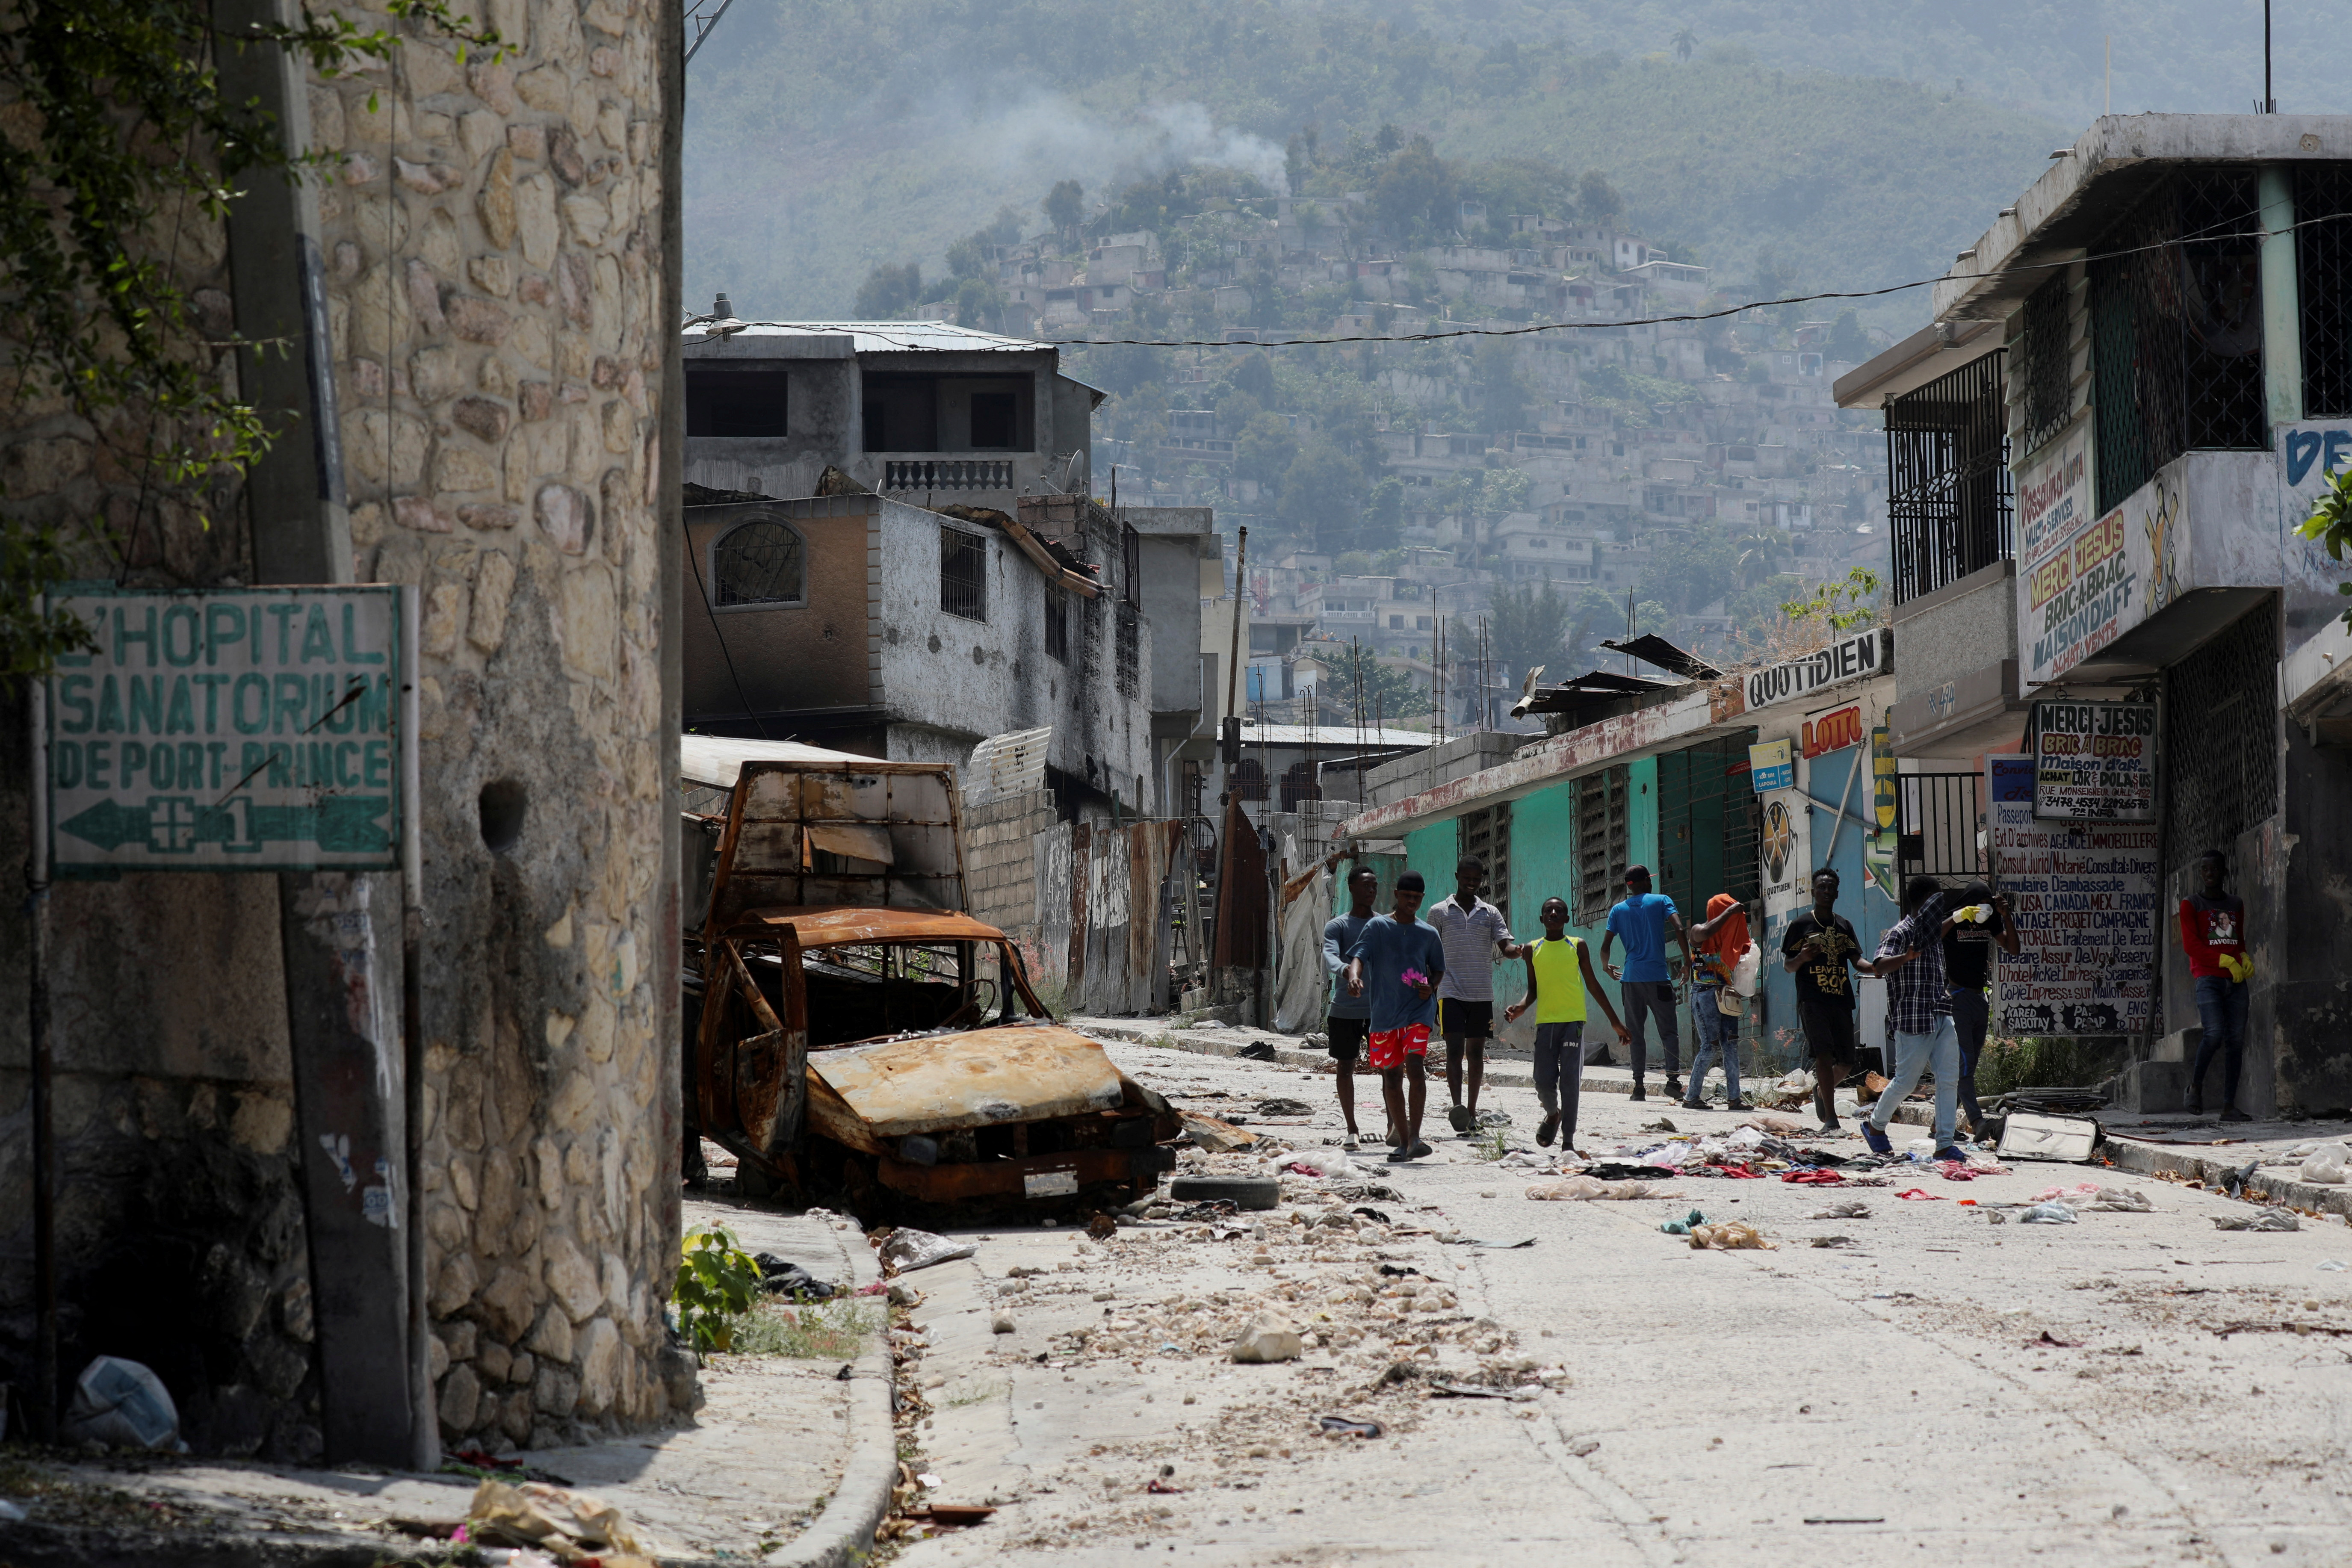 Thousands have been killed, raped, maimed and kidnapped as gangs lay siege to Port-au-Prince